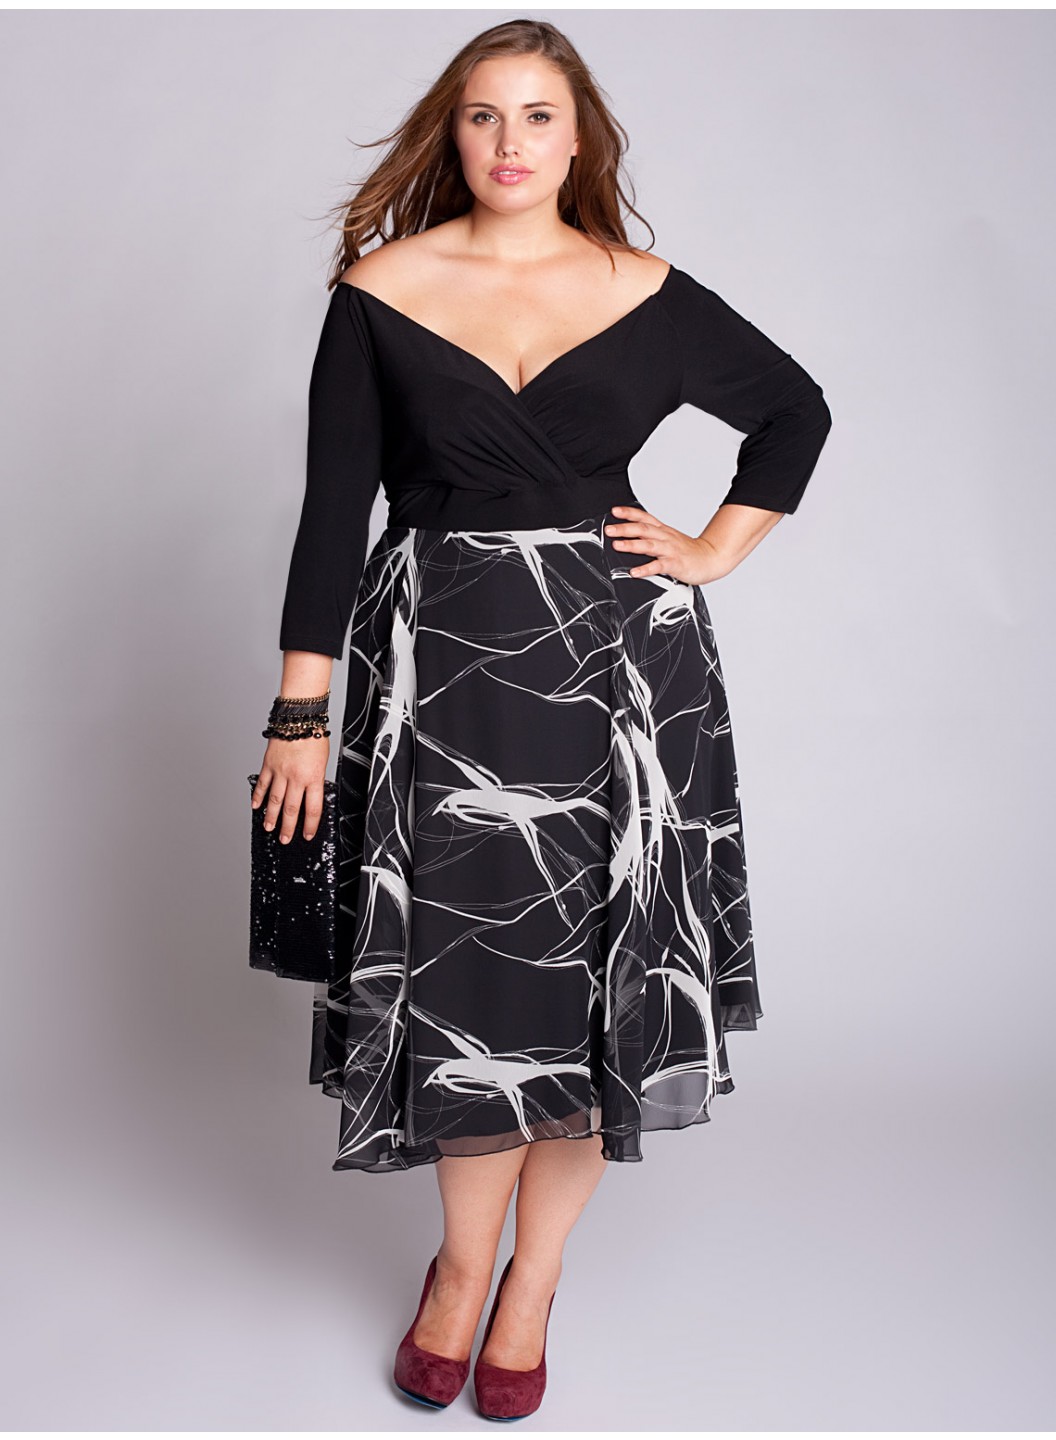 2 Piece Formal Outfits Plus Size Summer - Photos